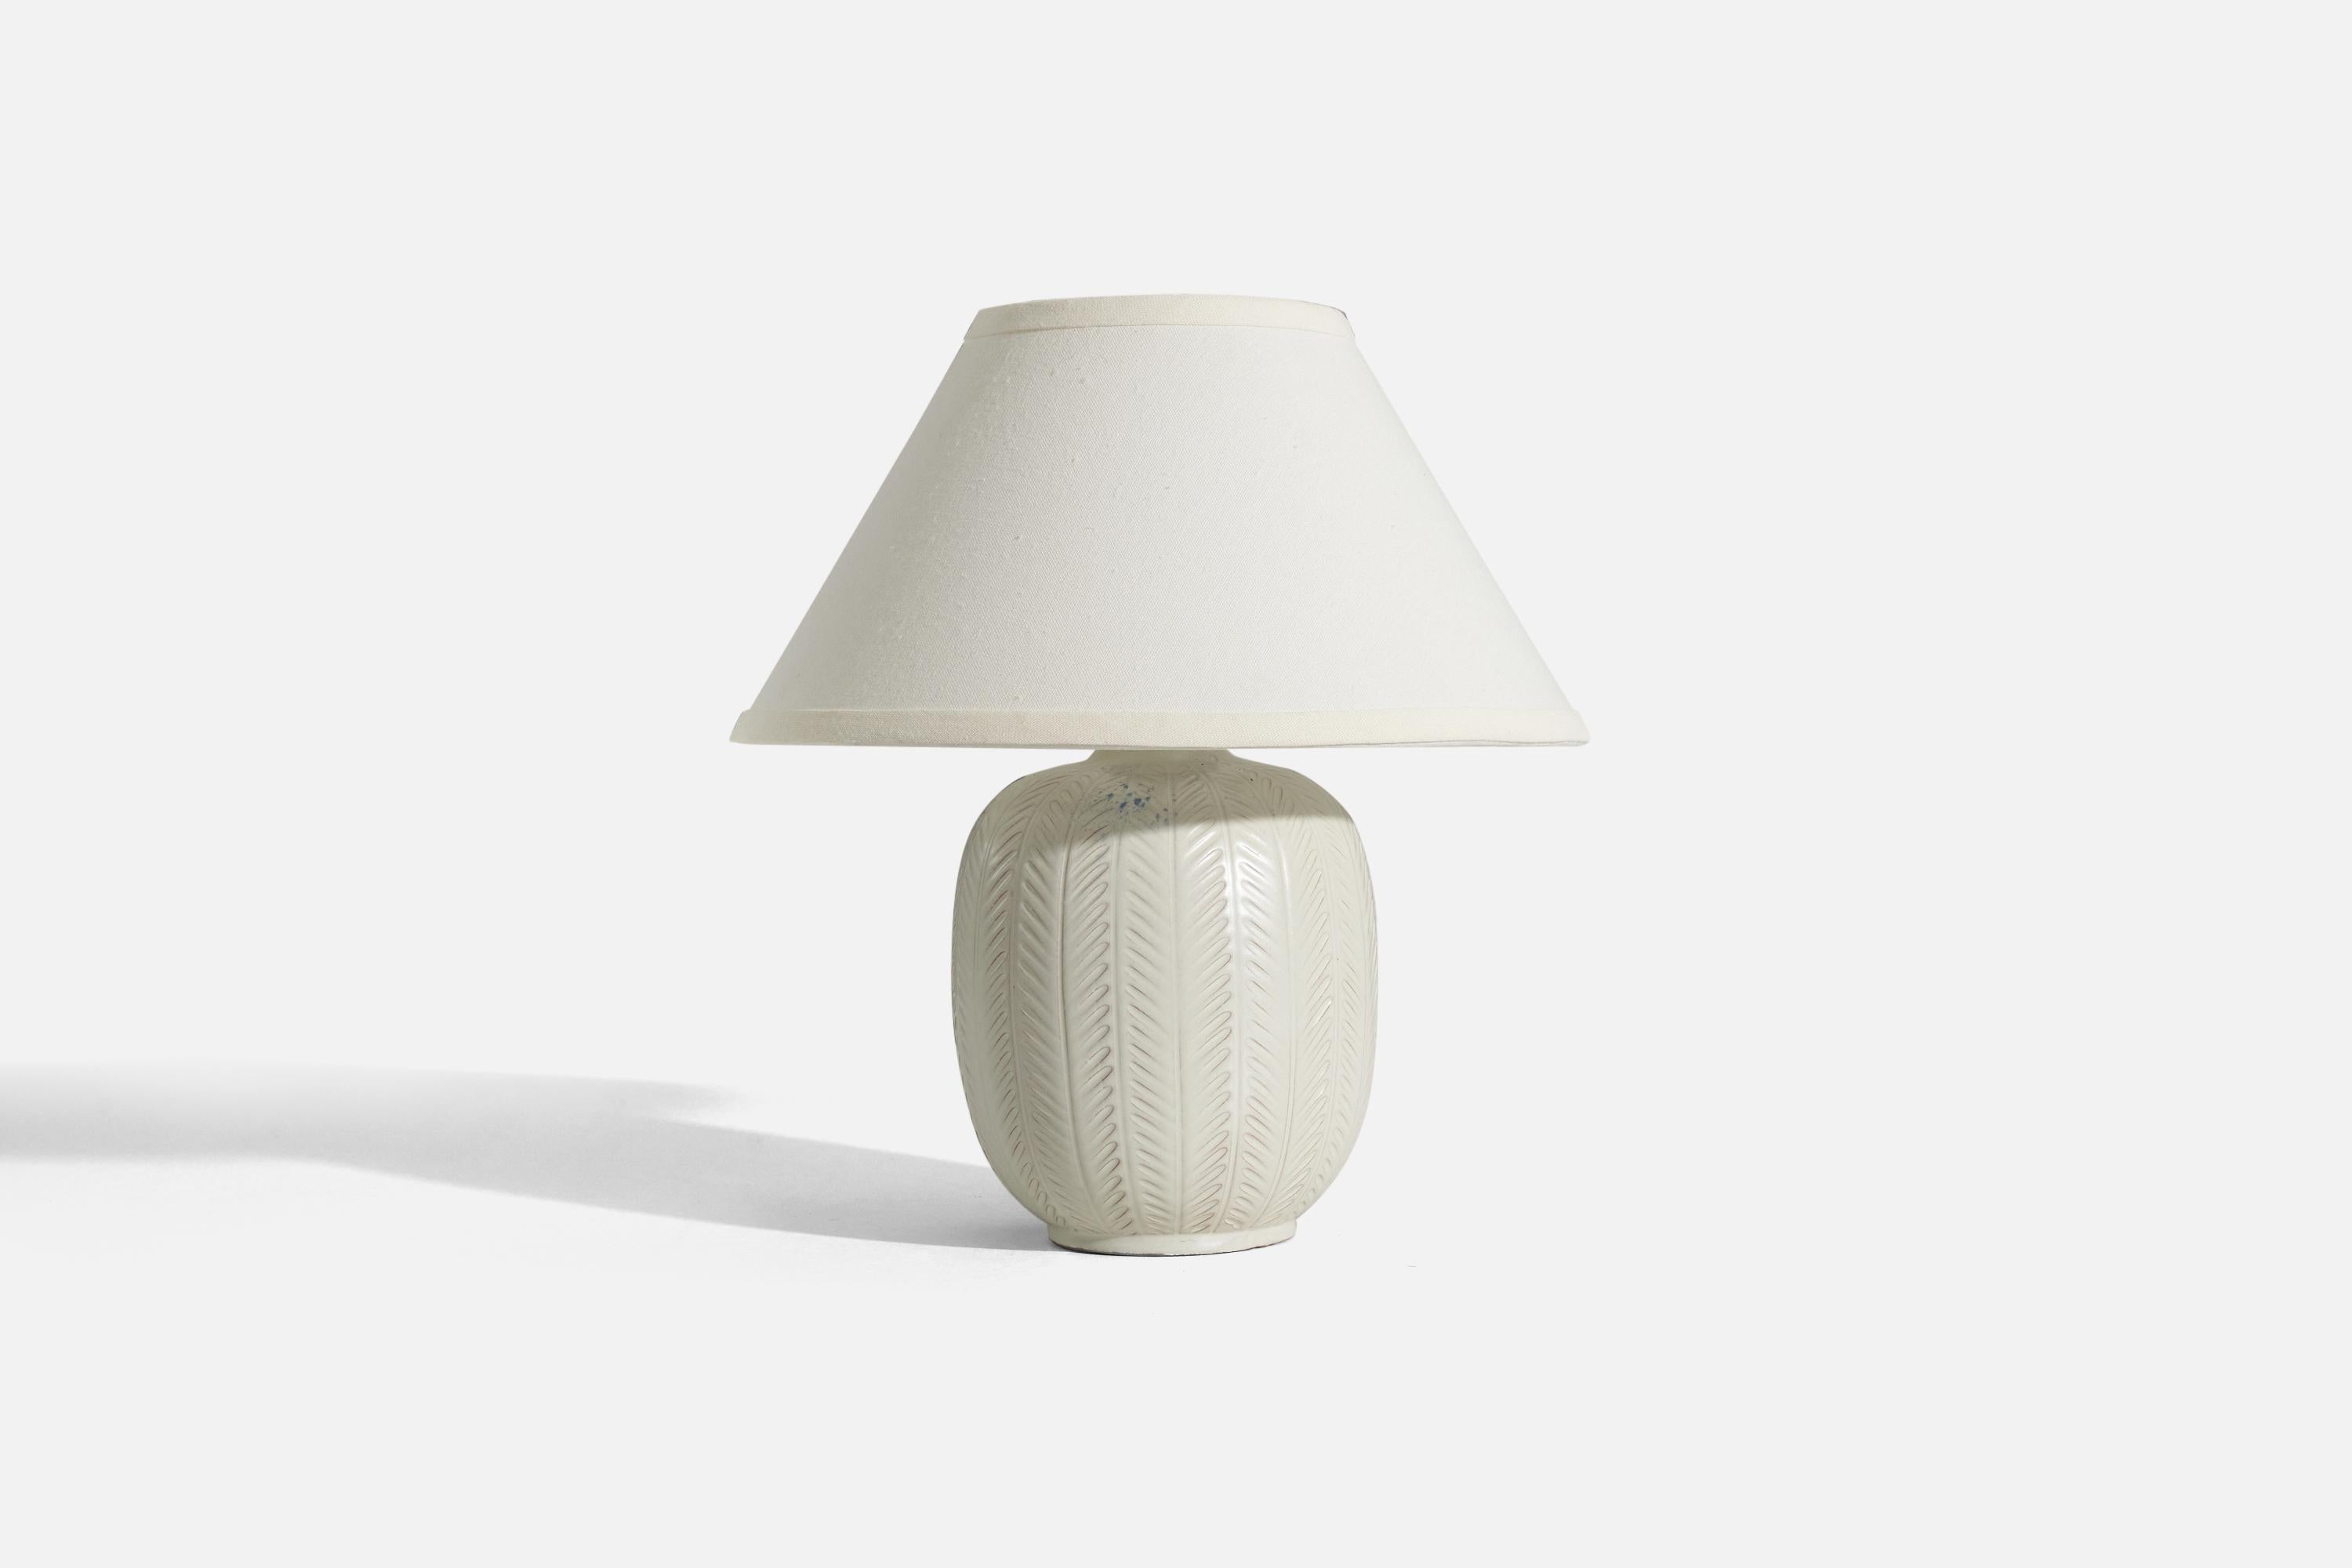 A white, glazed earthenware table lamp designed by Anna-Lisa Thomson and produced by Upsala-Ekeby, Sweden, 1940s. 

Sold without lampshade. 
Dimensions of Lamp (inches) : 10.375 x 6.125 x 6.125 (H x W x D)
Dimensions of Shade (inches) : 5.25 x